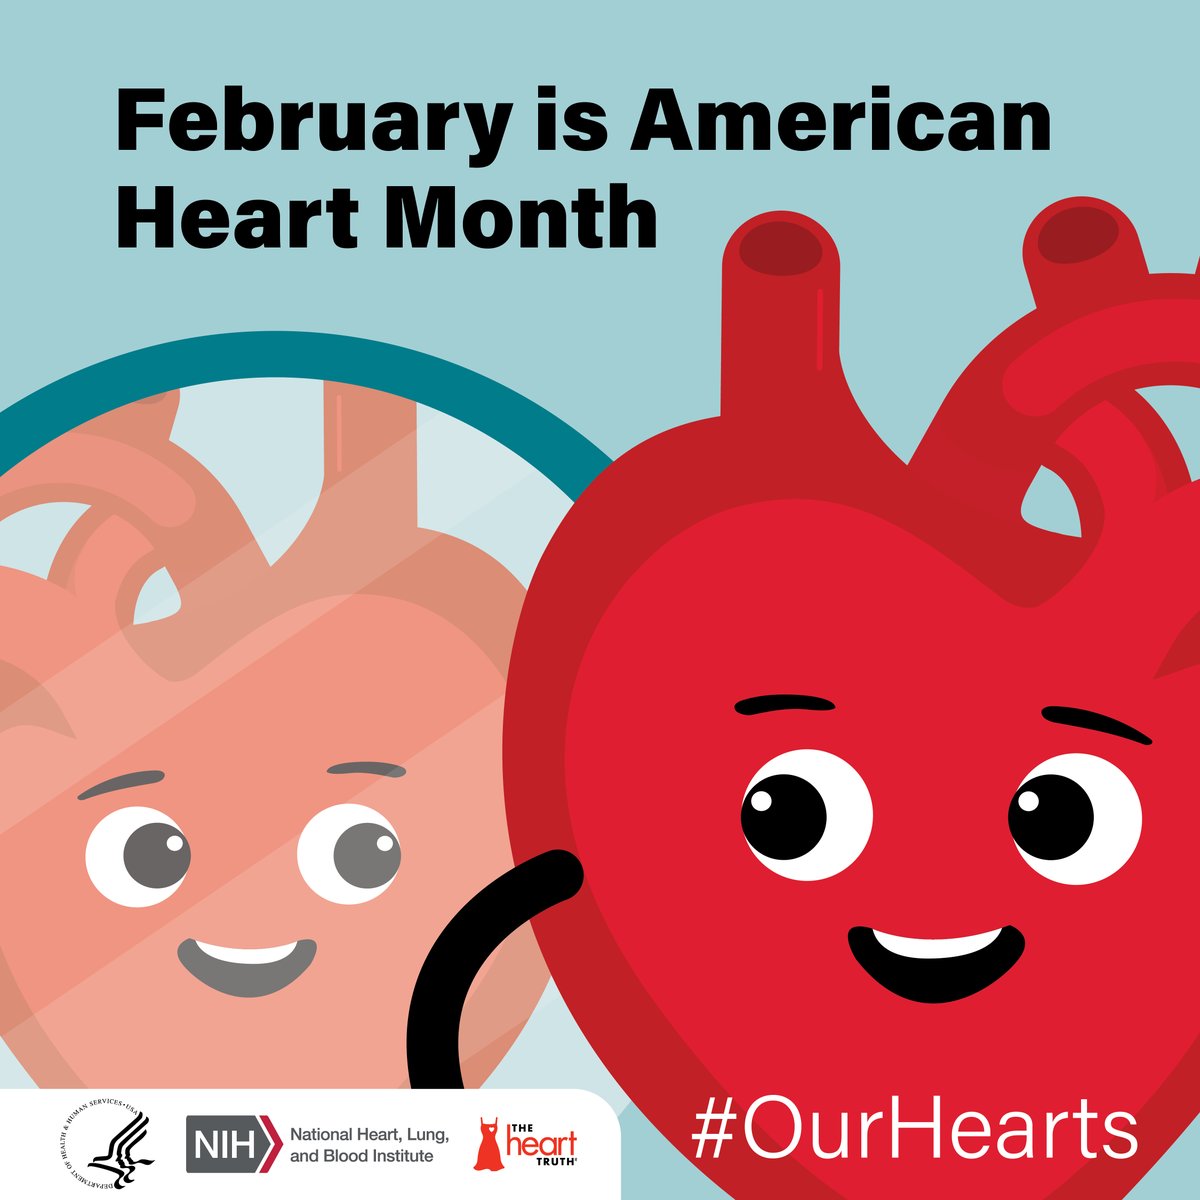 Studies show that regularly sleeping too little ups the risk of high blood pressure. Following a bedtime routine that allows for 7 to 9 hours of sleep is important for heart health. Learn more: bit.ly/3wMVElD #OurHearts @TheHeartTruth